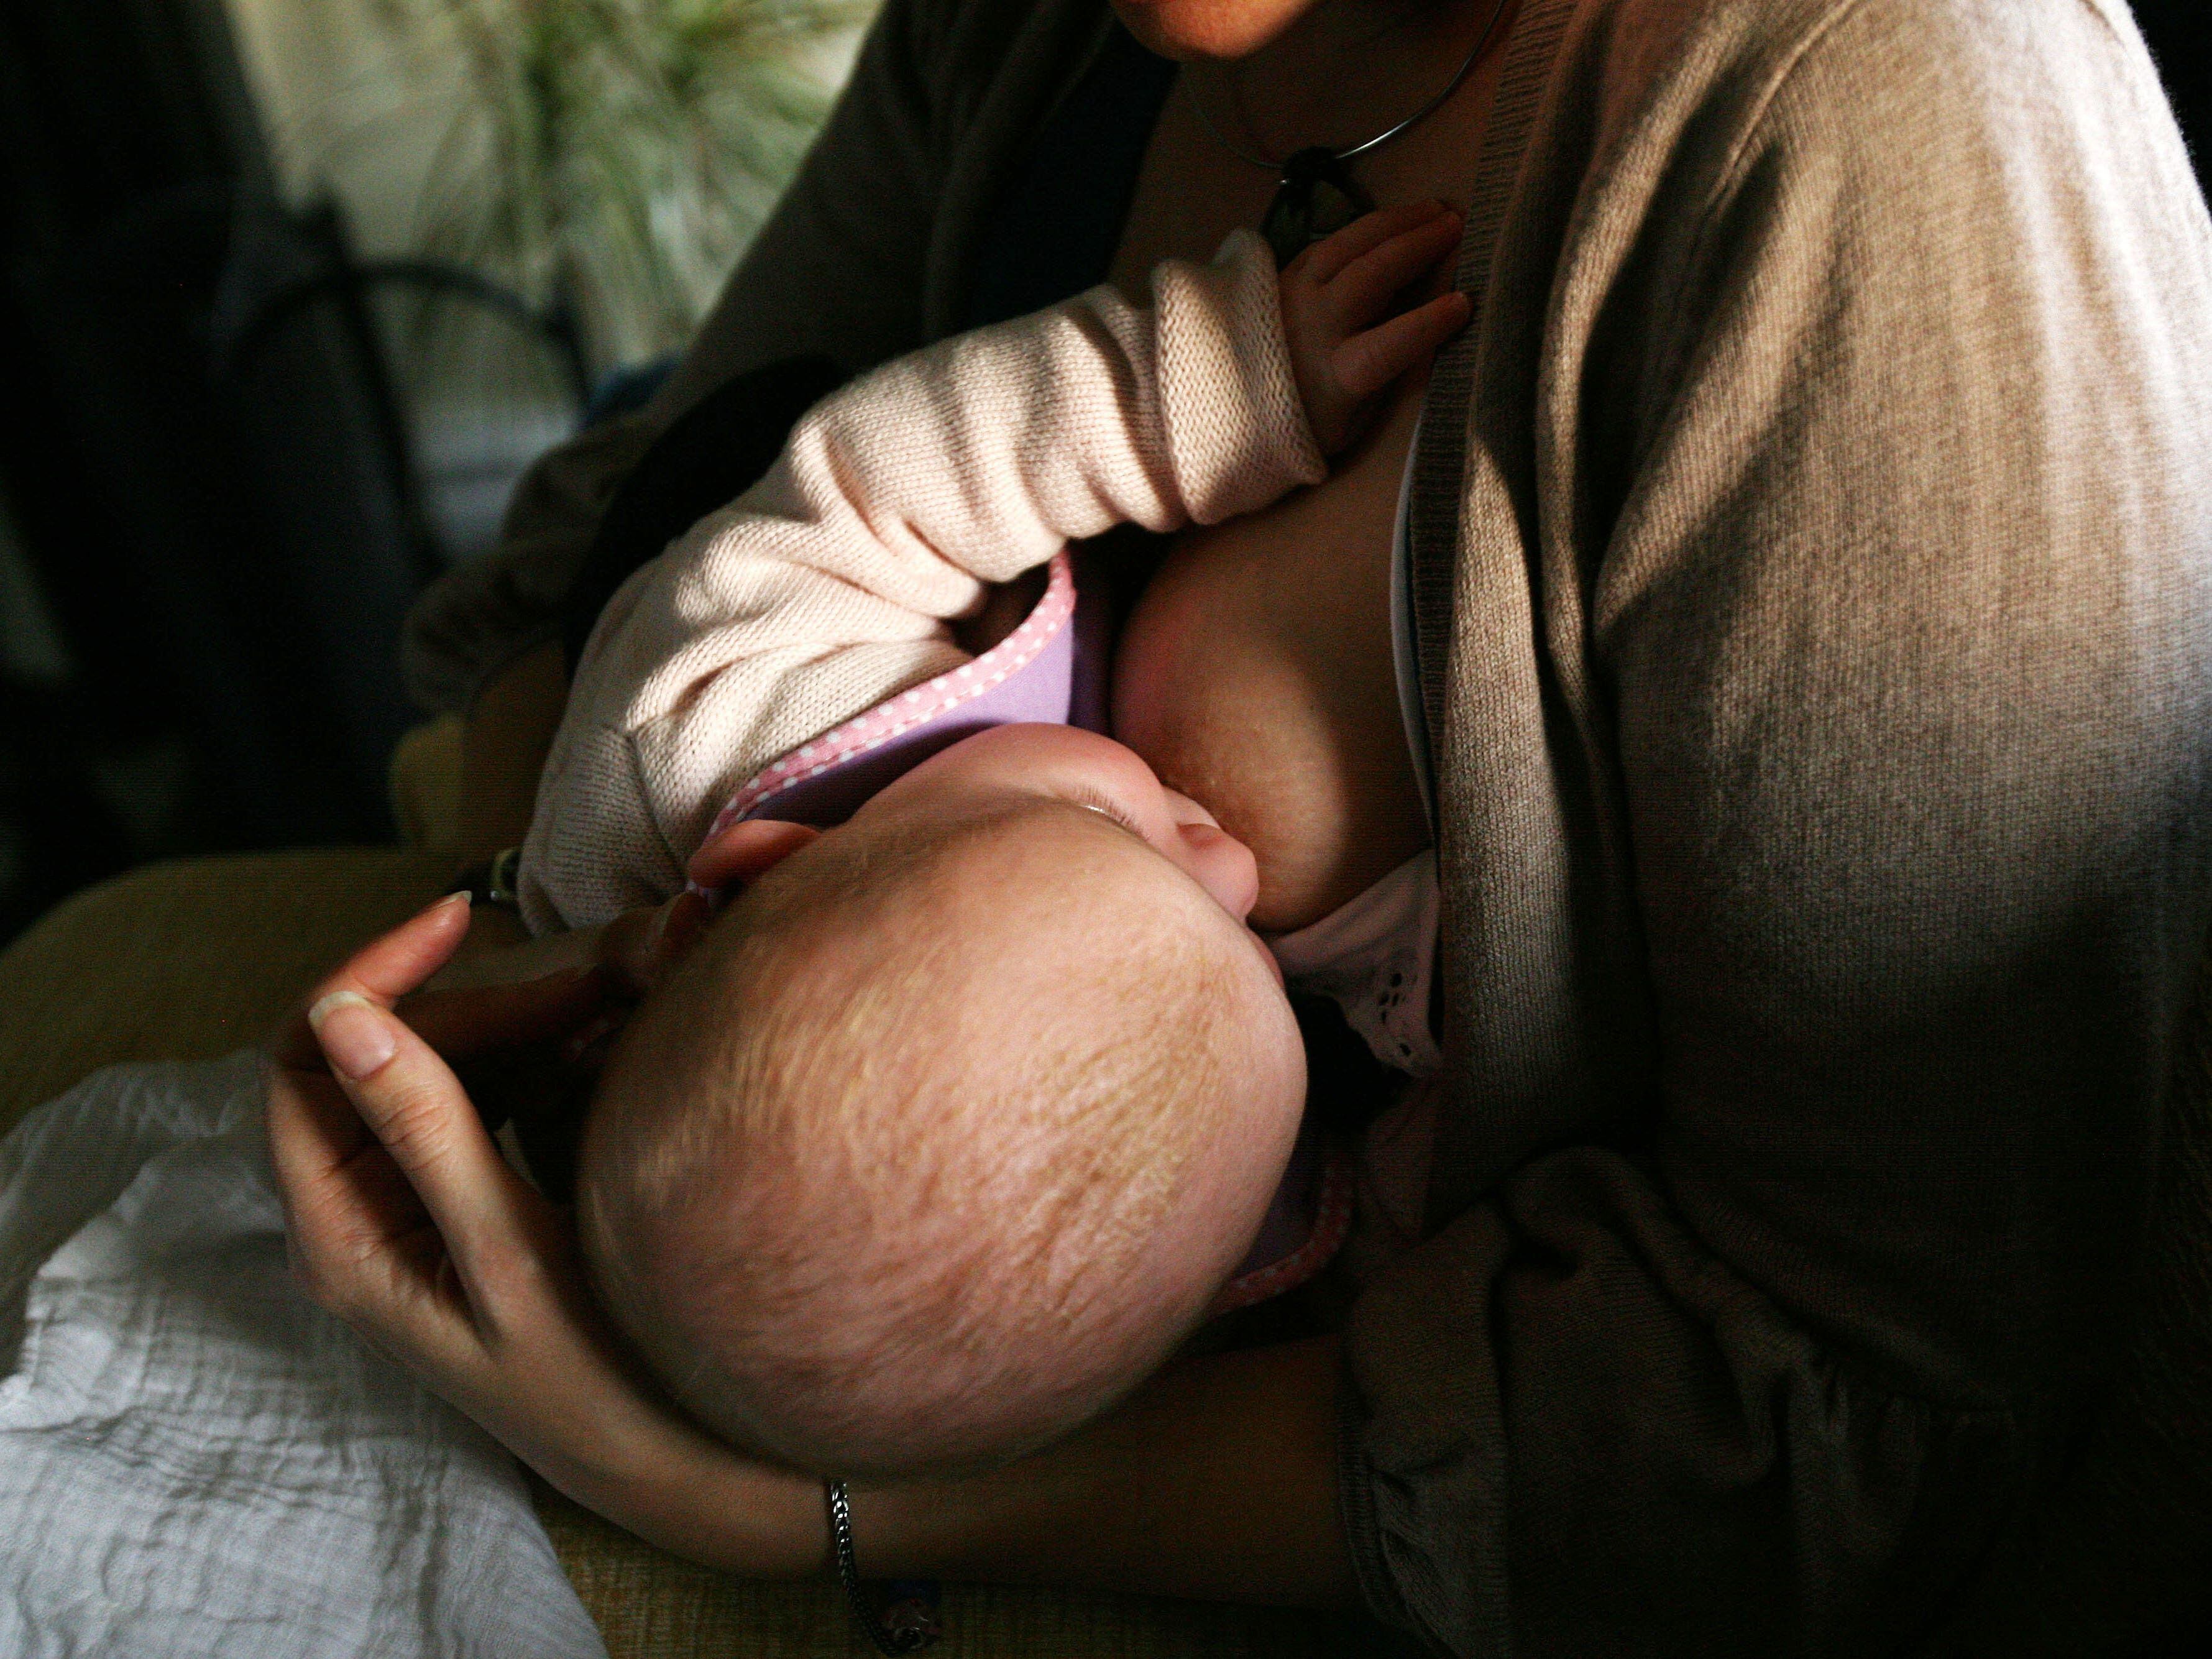 Breastfeeding mums less likely to give their babies treats, study shows